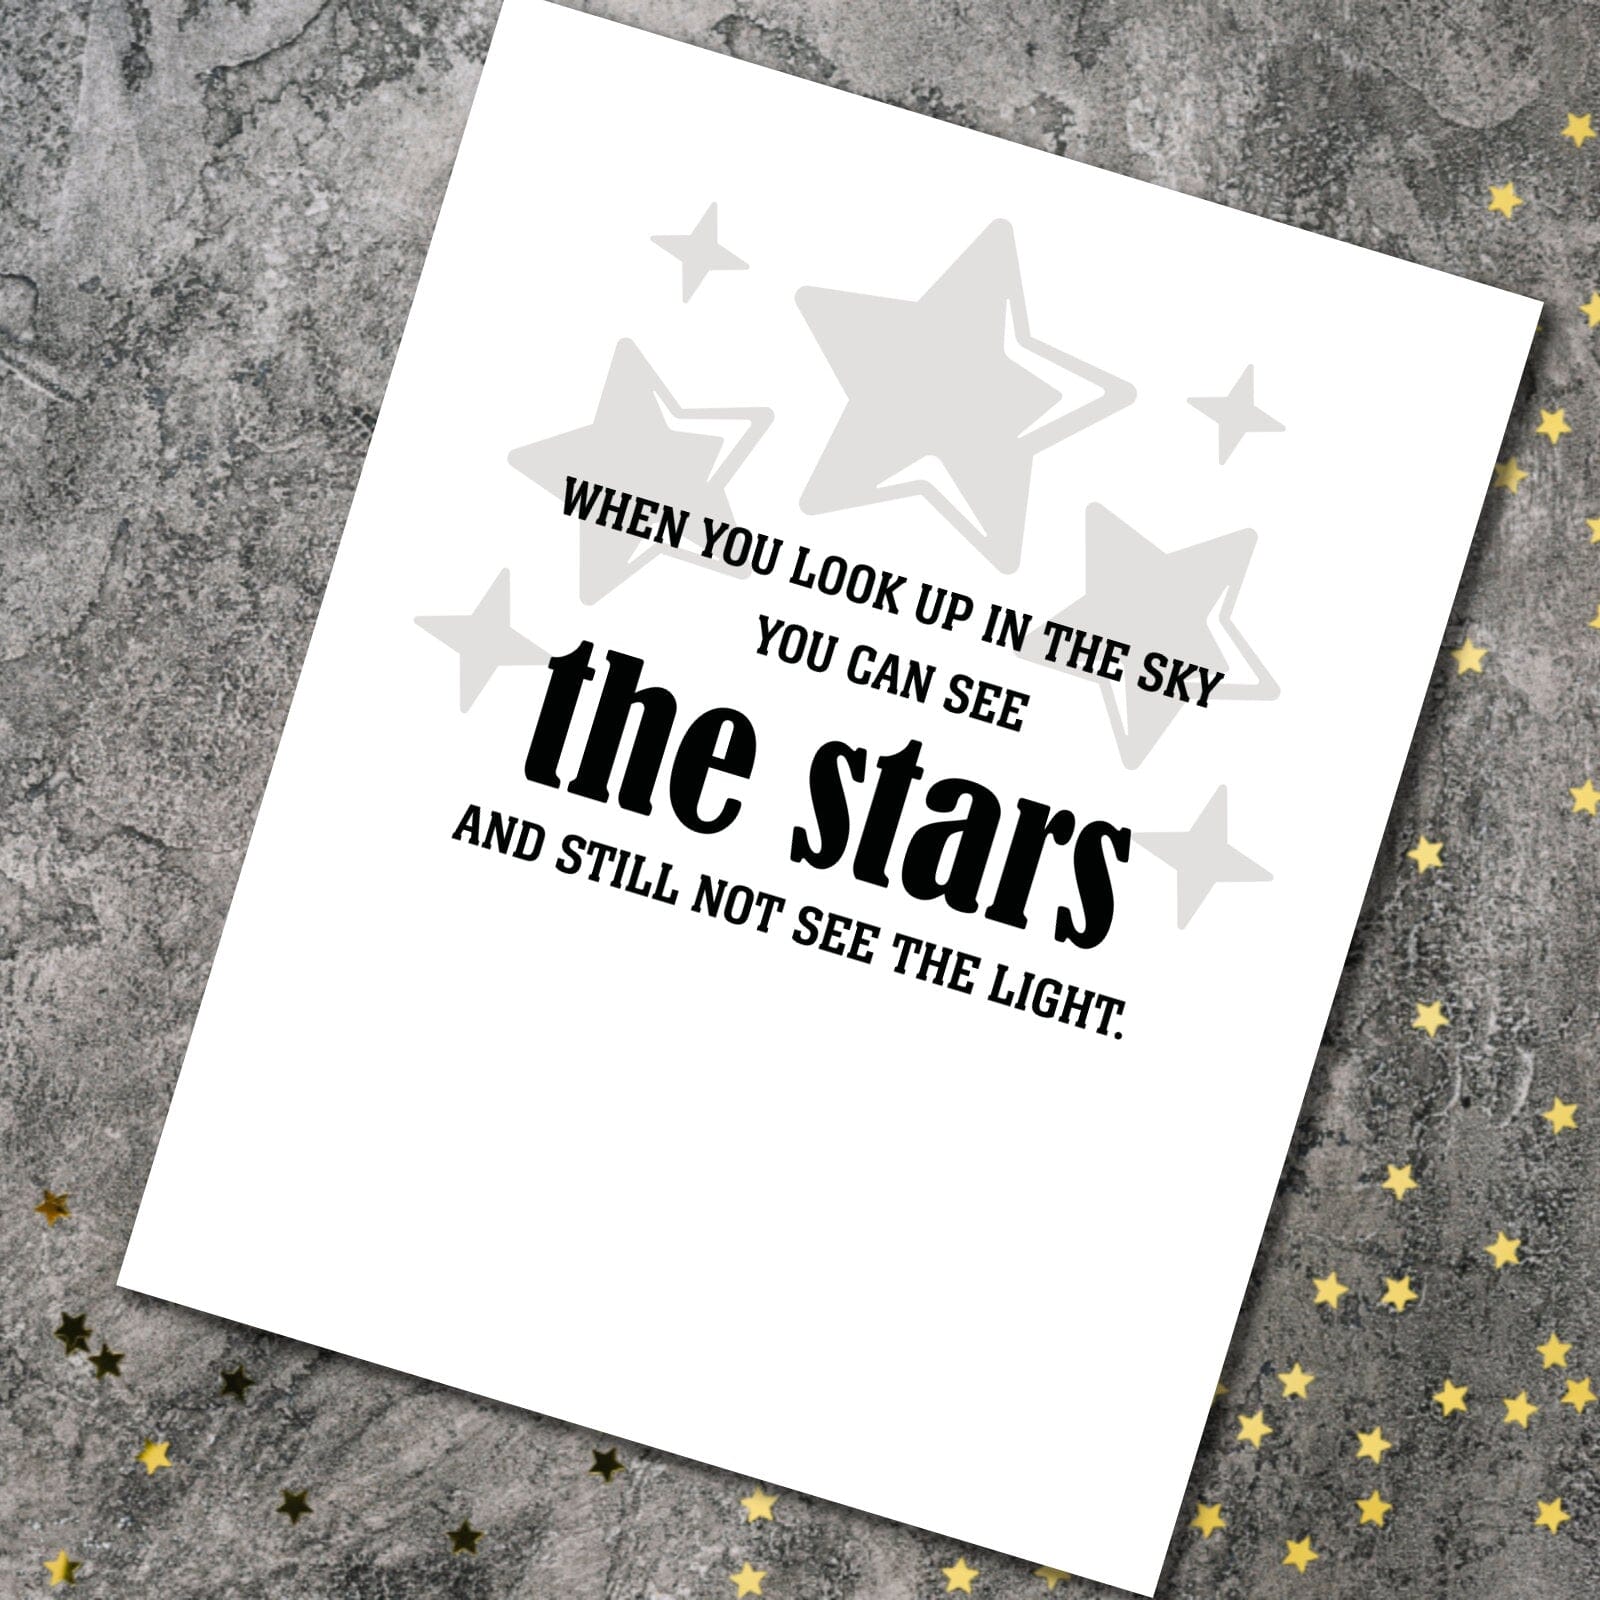 See the Stars and Still not see the Light - Wise and Witty Print Wise and Wiseass Quotes Song Lyrics Art 8x10 Print 